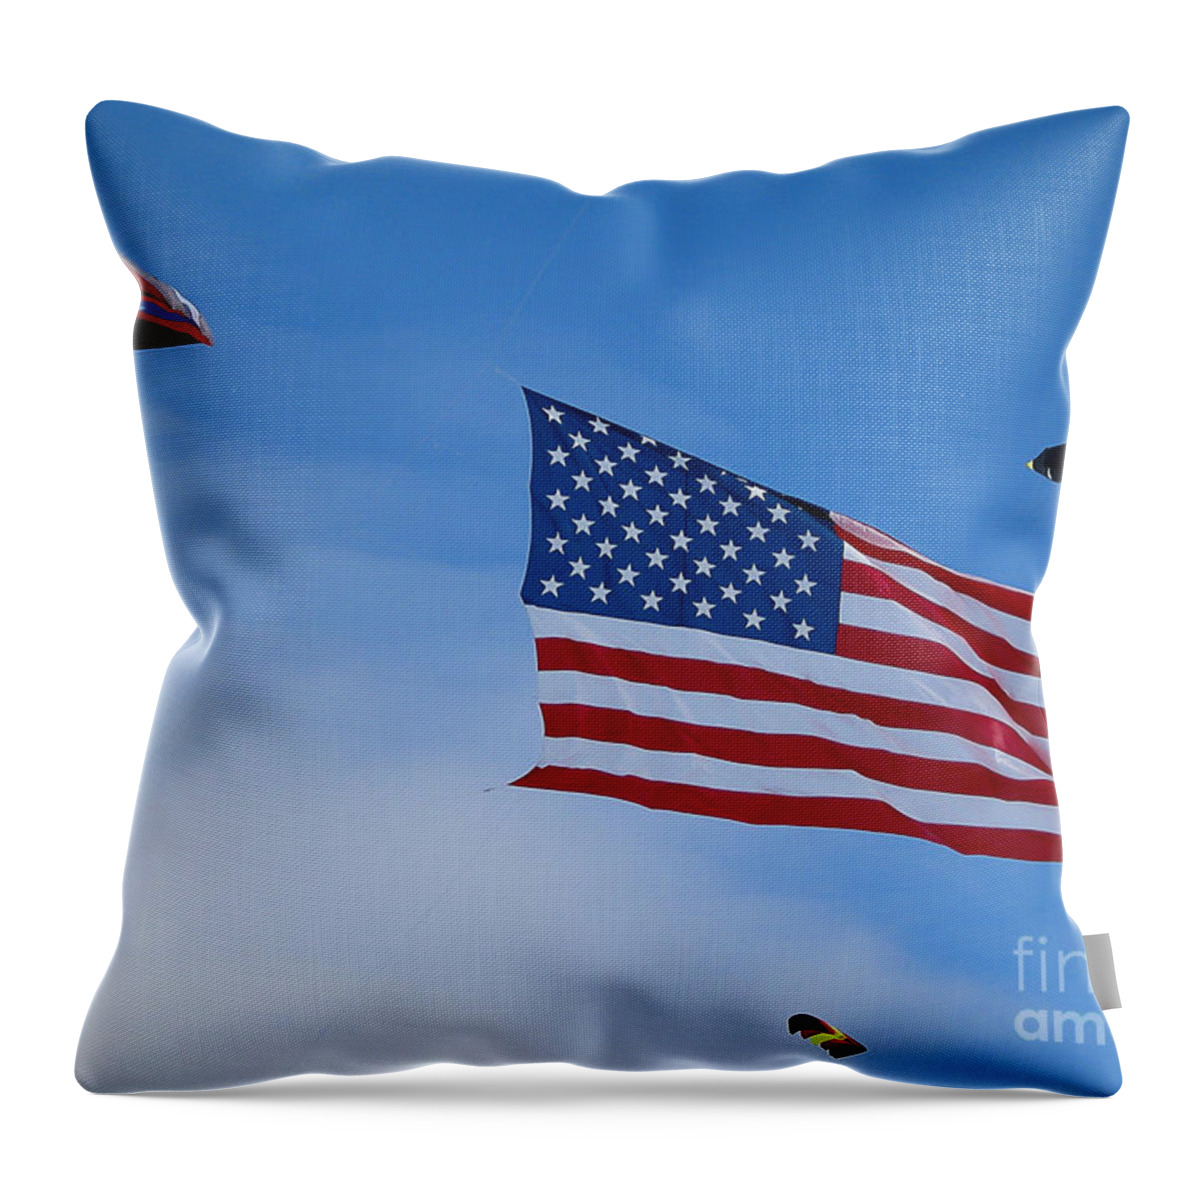 Kites Throw Pillow featuring the photograph Kites On Ice by Steven Ralser